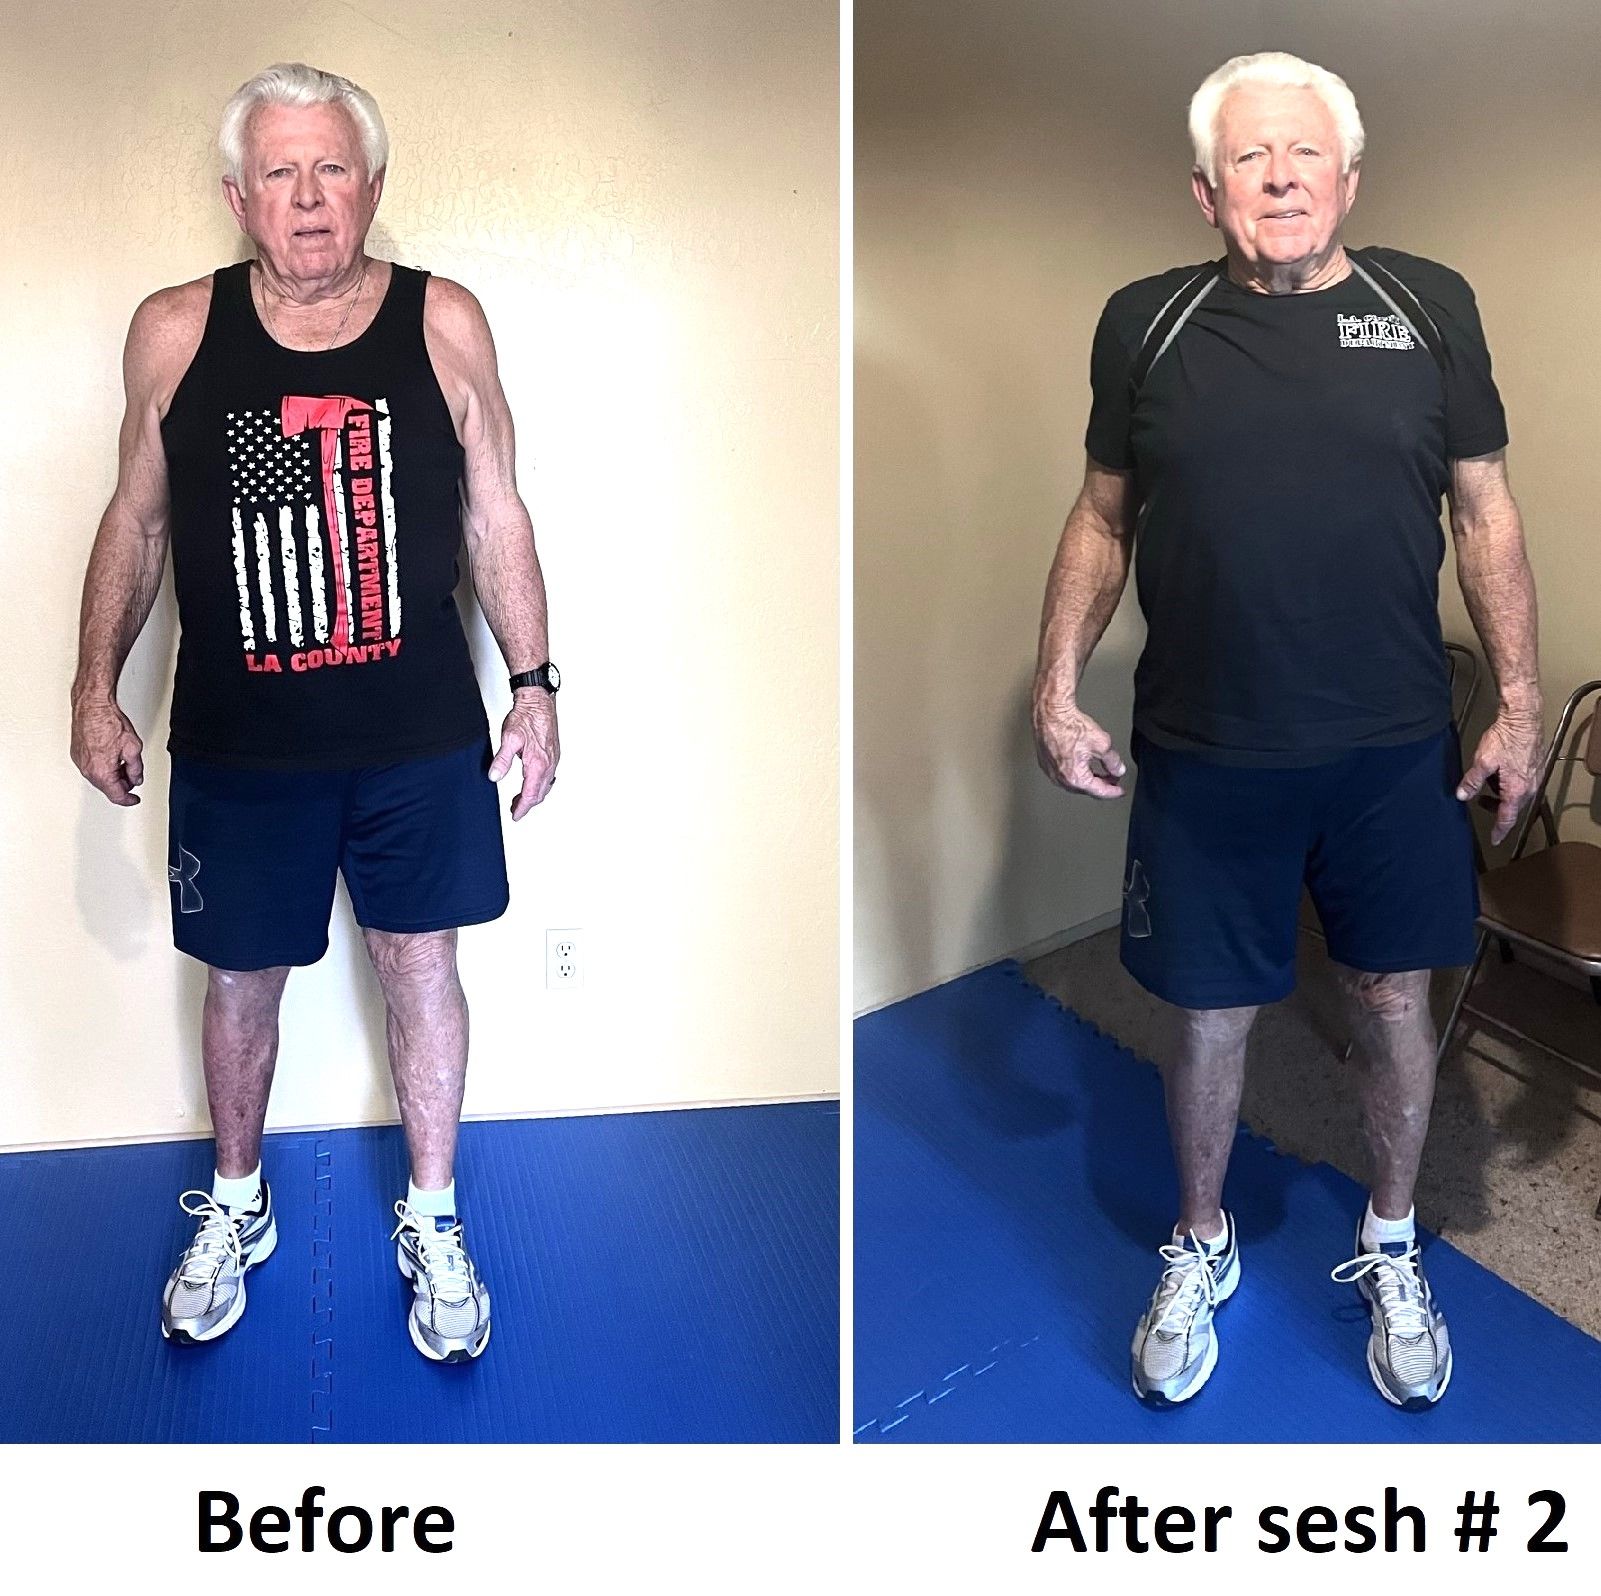 Before and after older man has improved posture and no longer leaning over to one side